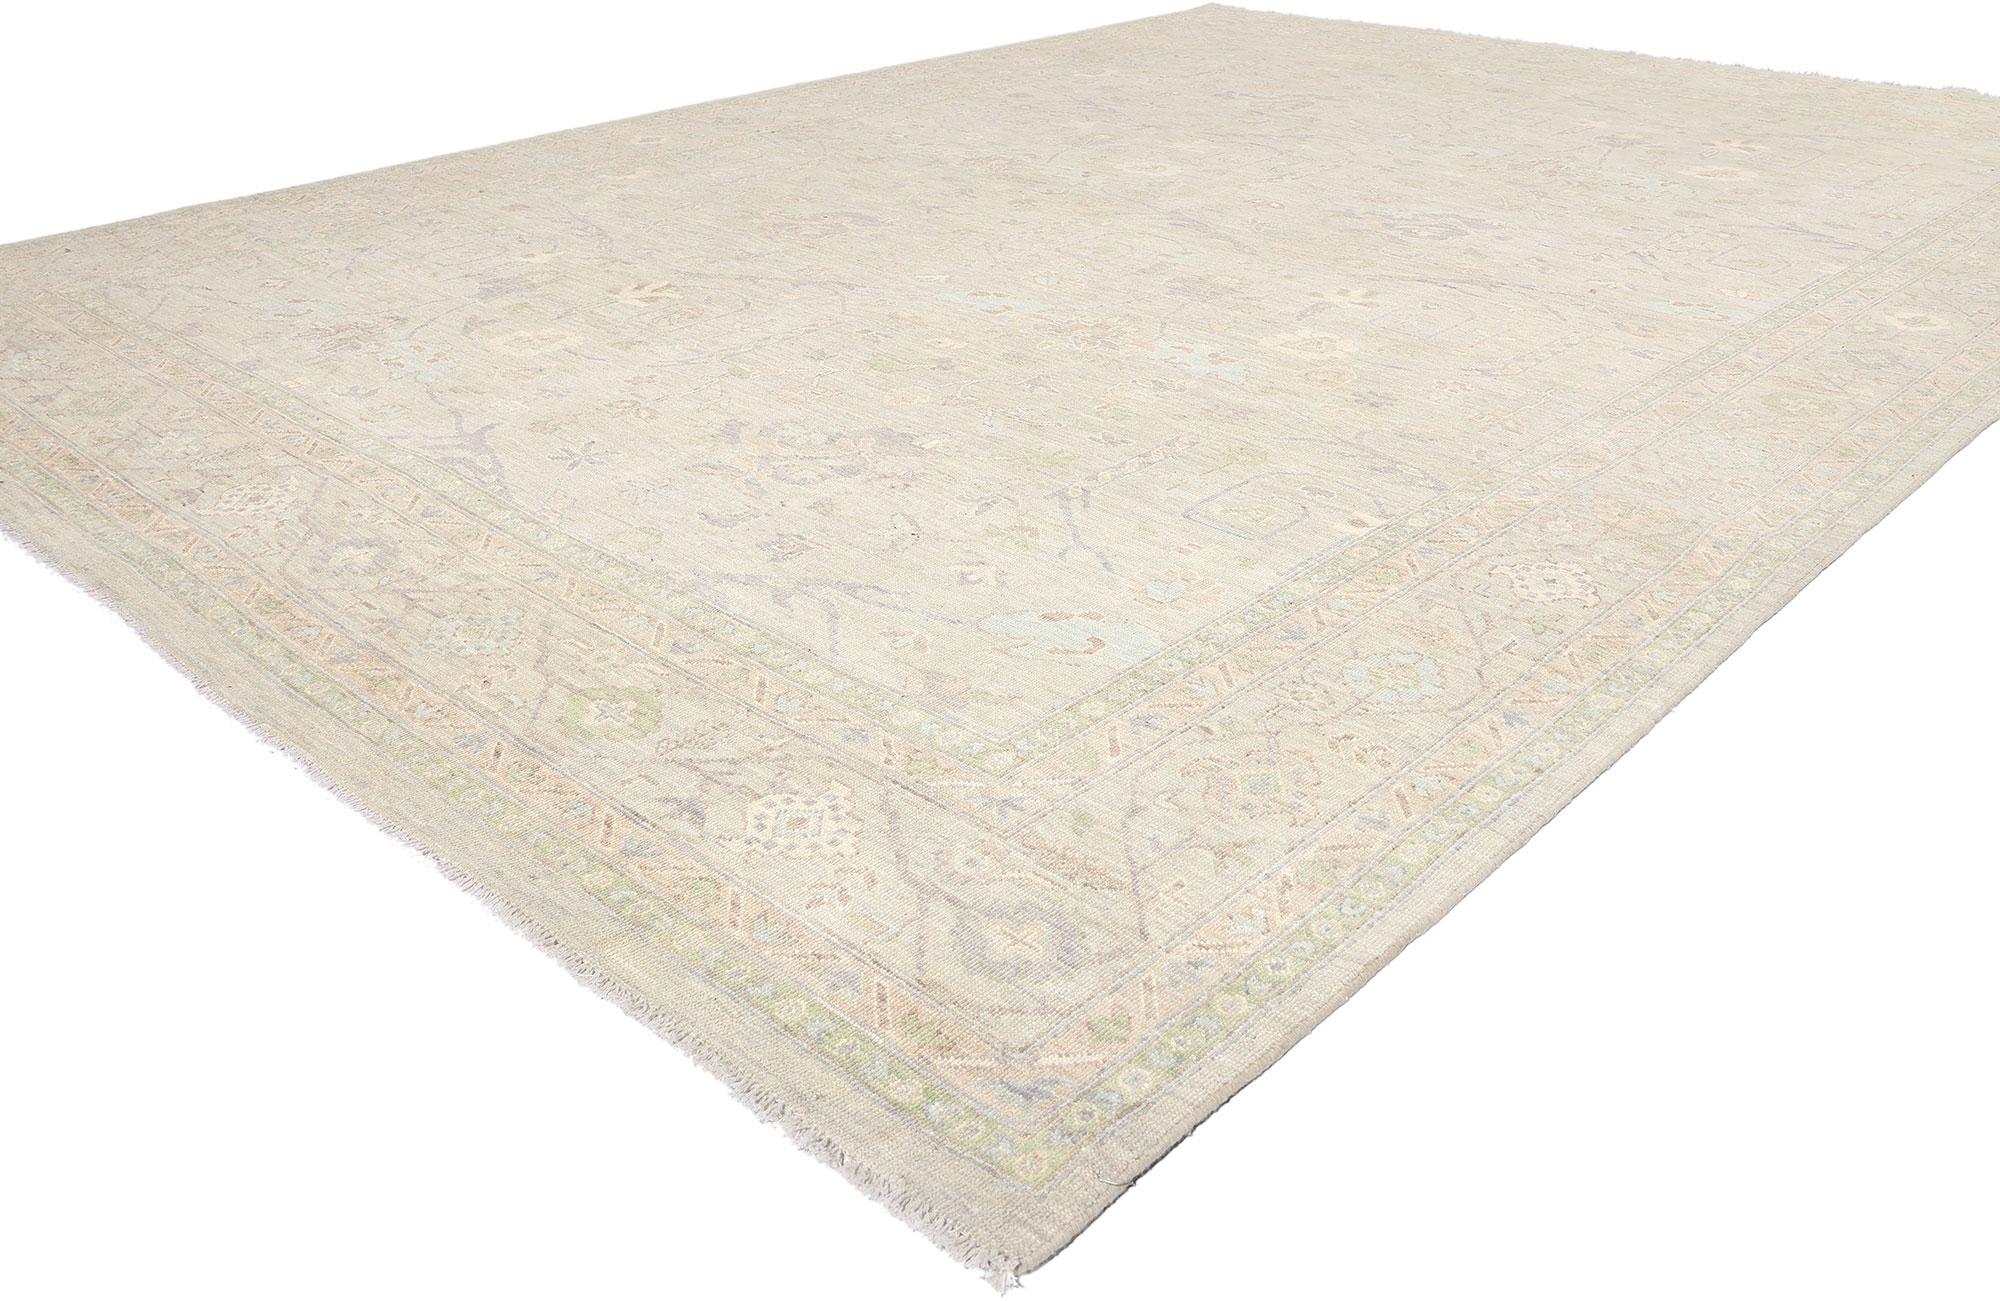 81111 Organic Modern Sultanabad Rug, 09'10 x 13'07. Pakistani Sultanabad rugs are exquisite handcrafted treasures hailing from Pakistan, drawing inspiration from the traditional designs of Sultanabad rugs originating in Persia. Revered for their